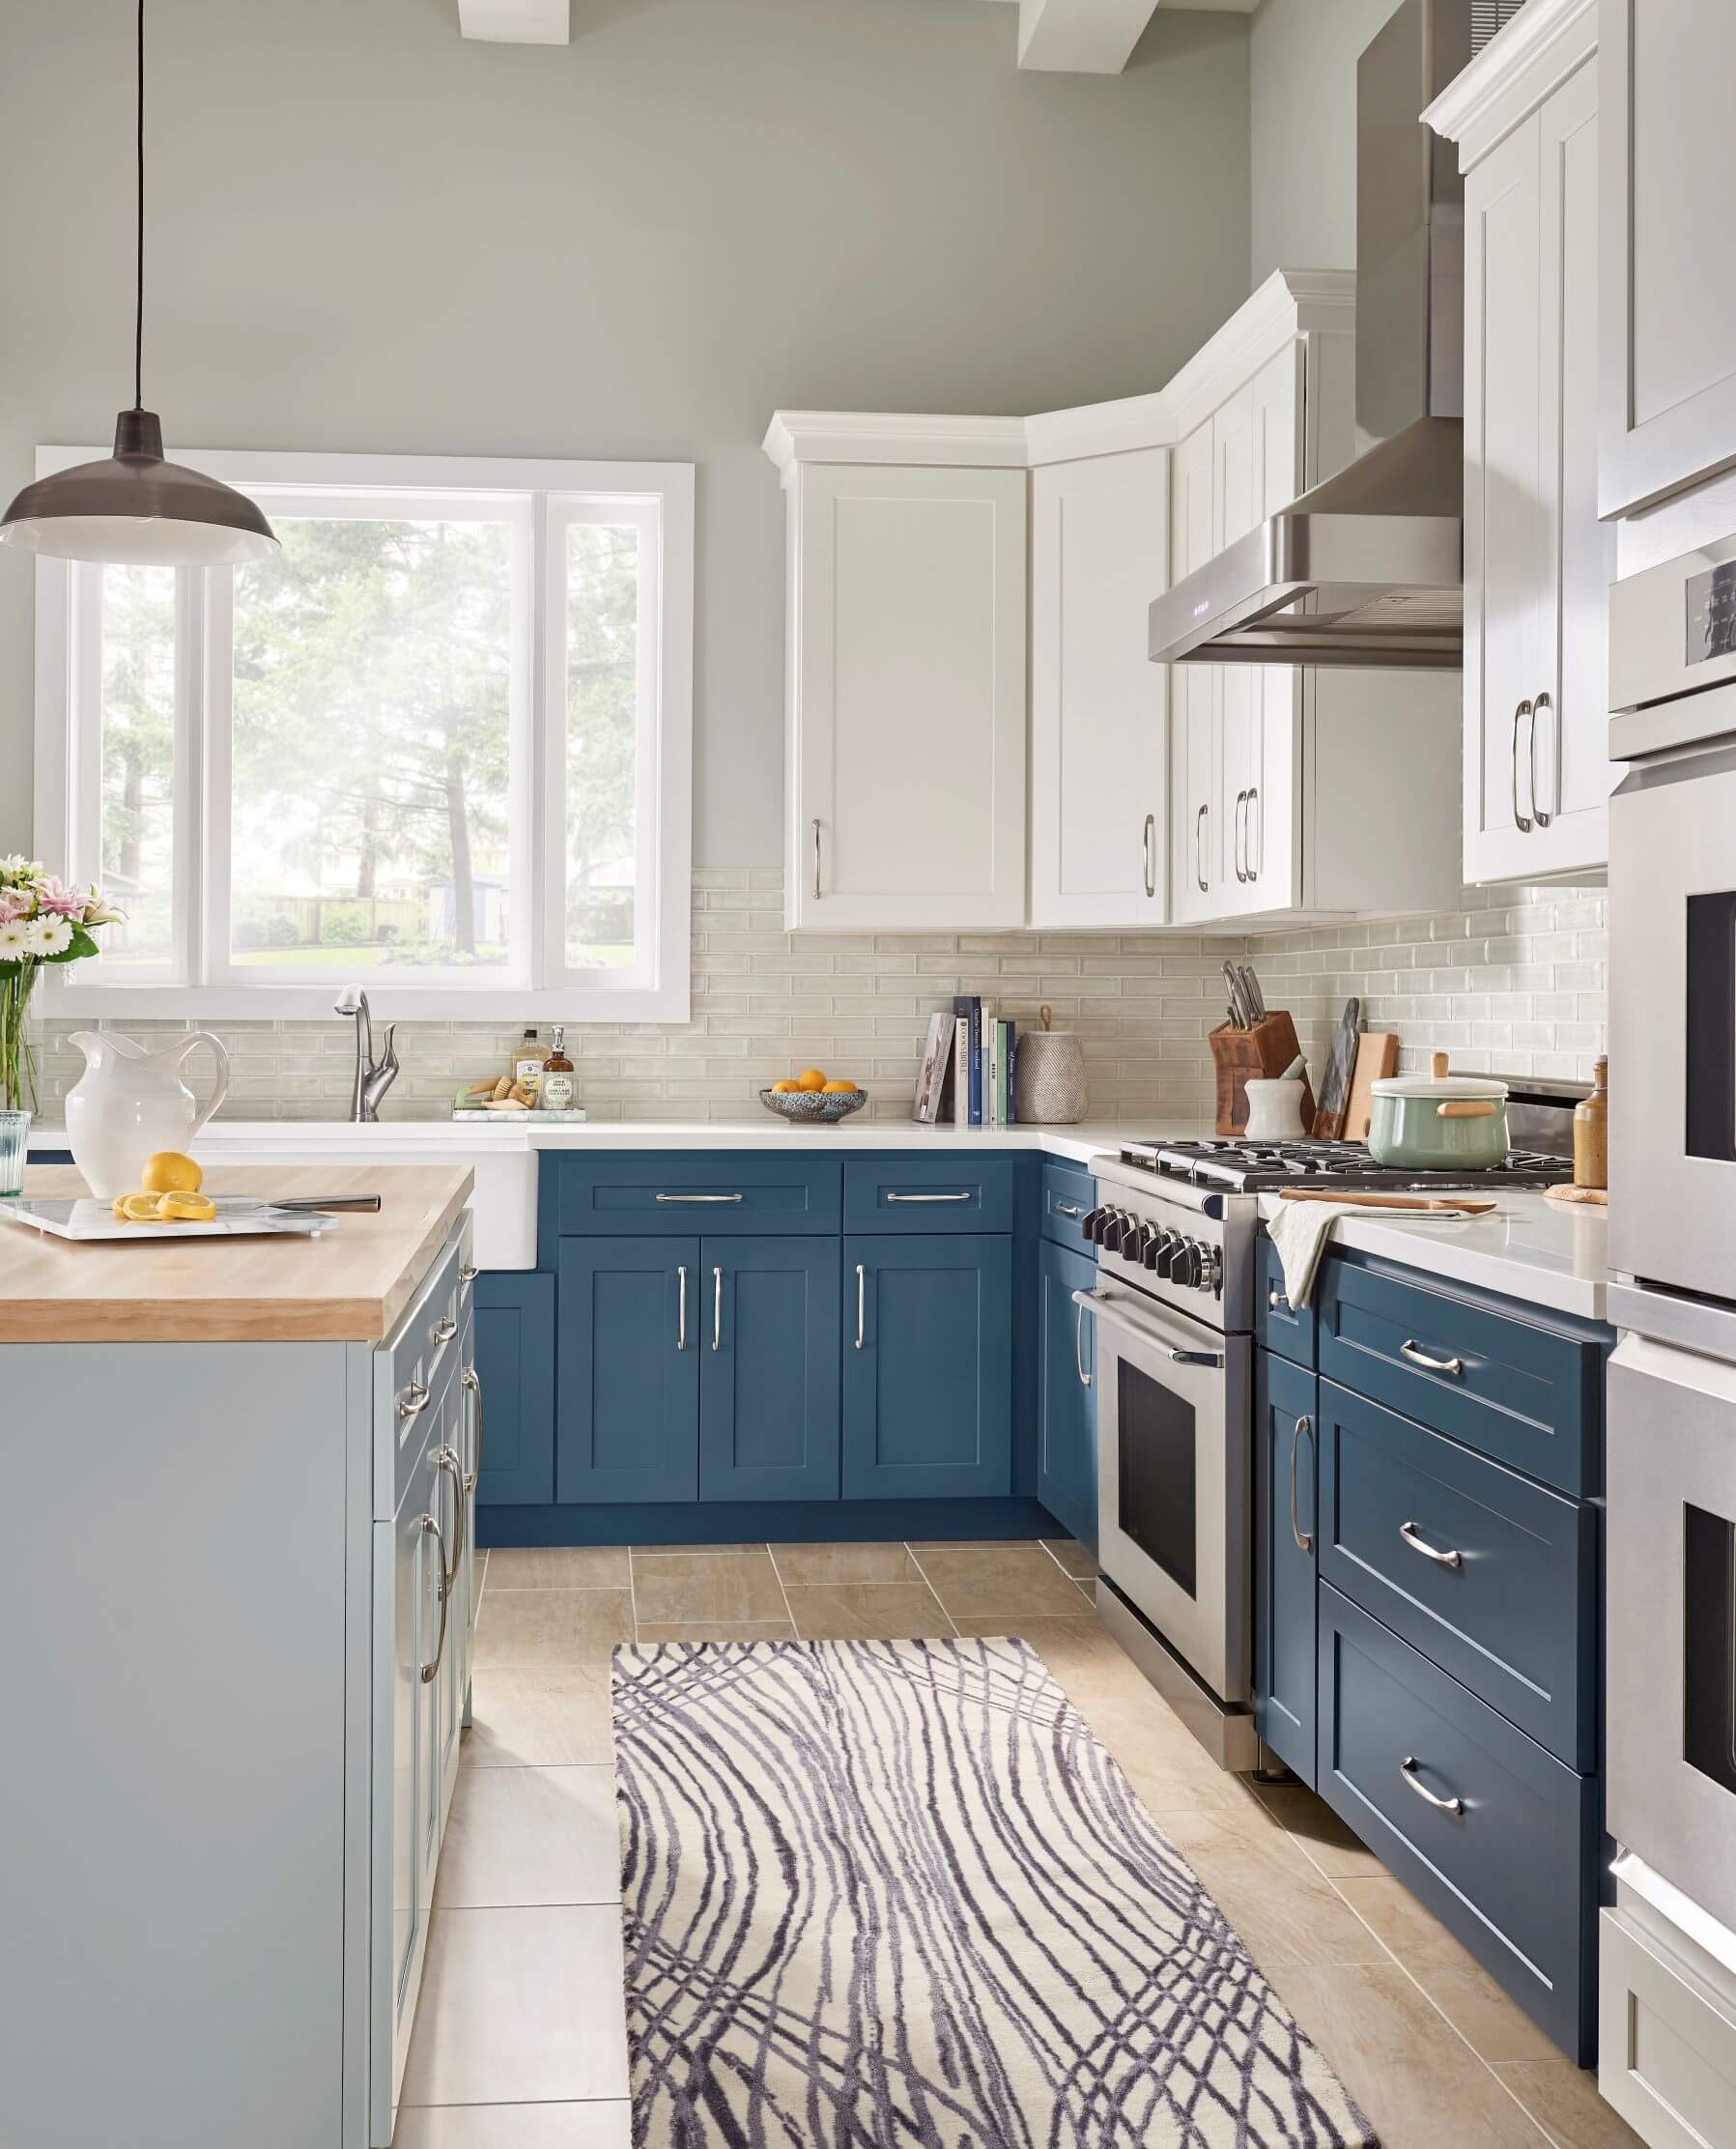 Pennsylvania Quick Kitchen Cabinets in blue and white